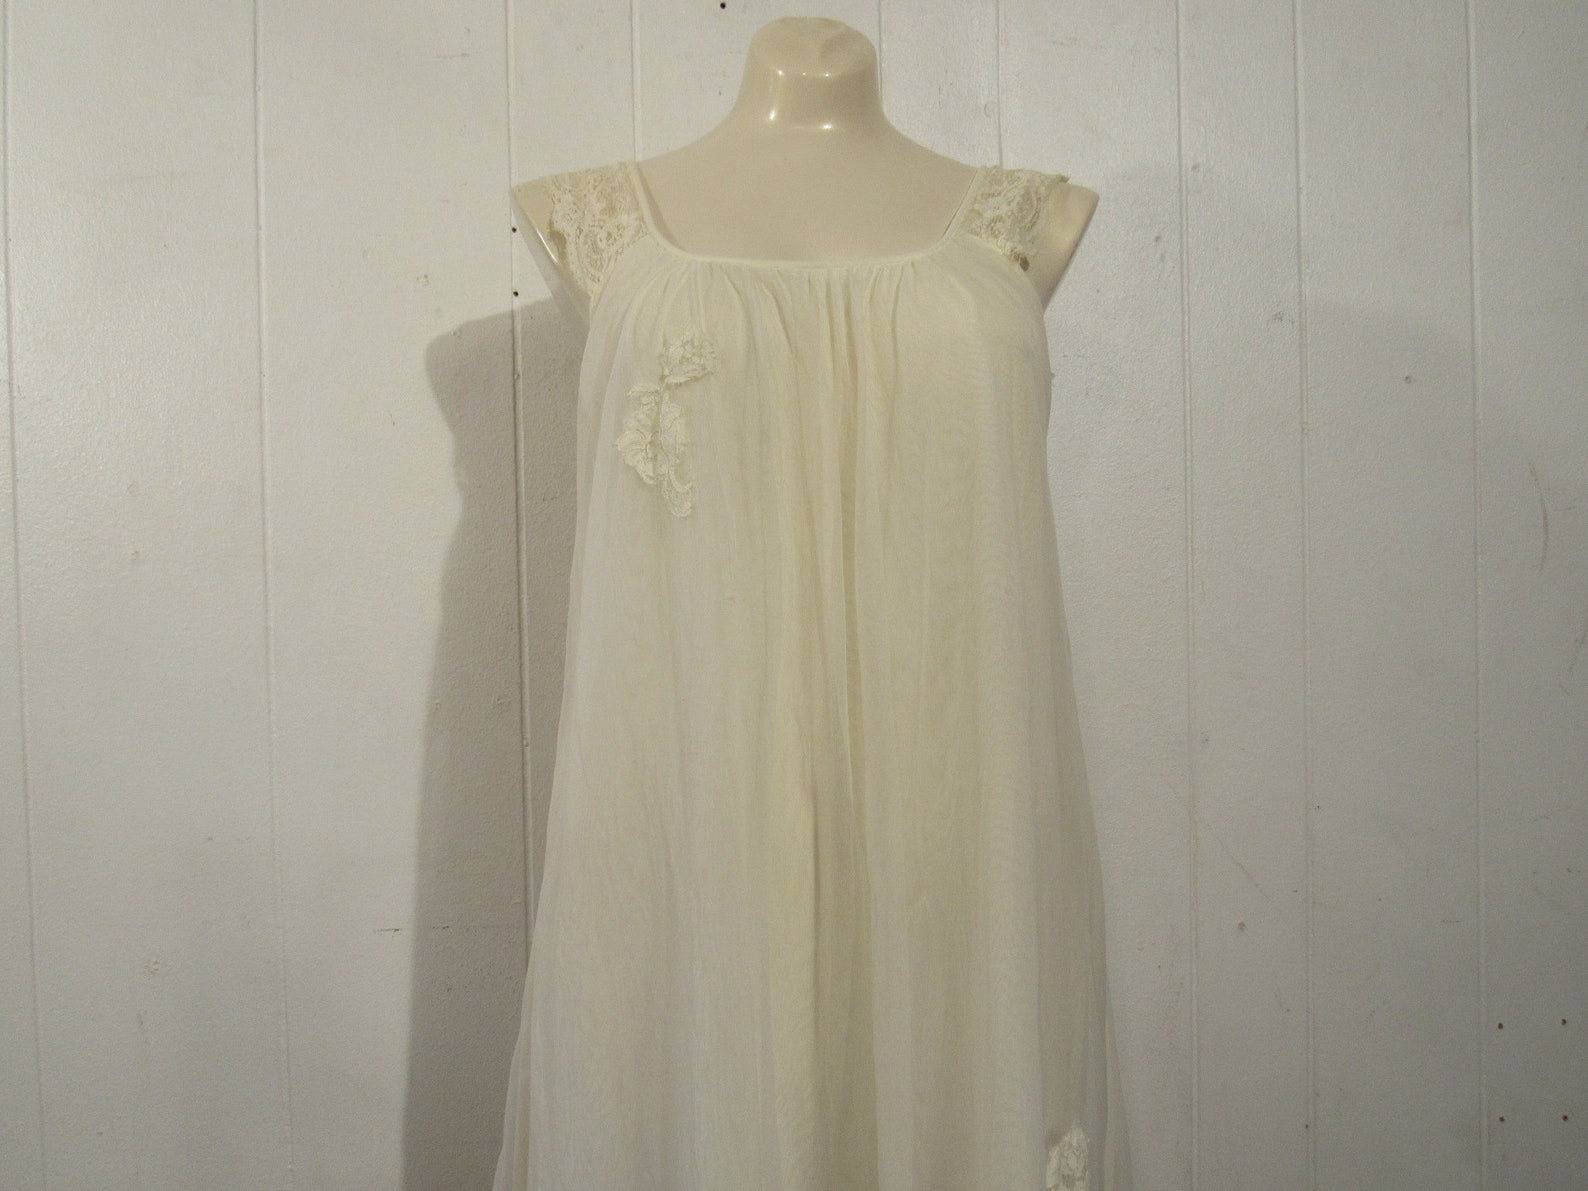 Vintage Nightgown Nighty Sheer Nightgown 1950s Nightgown - Etsy